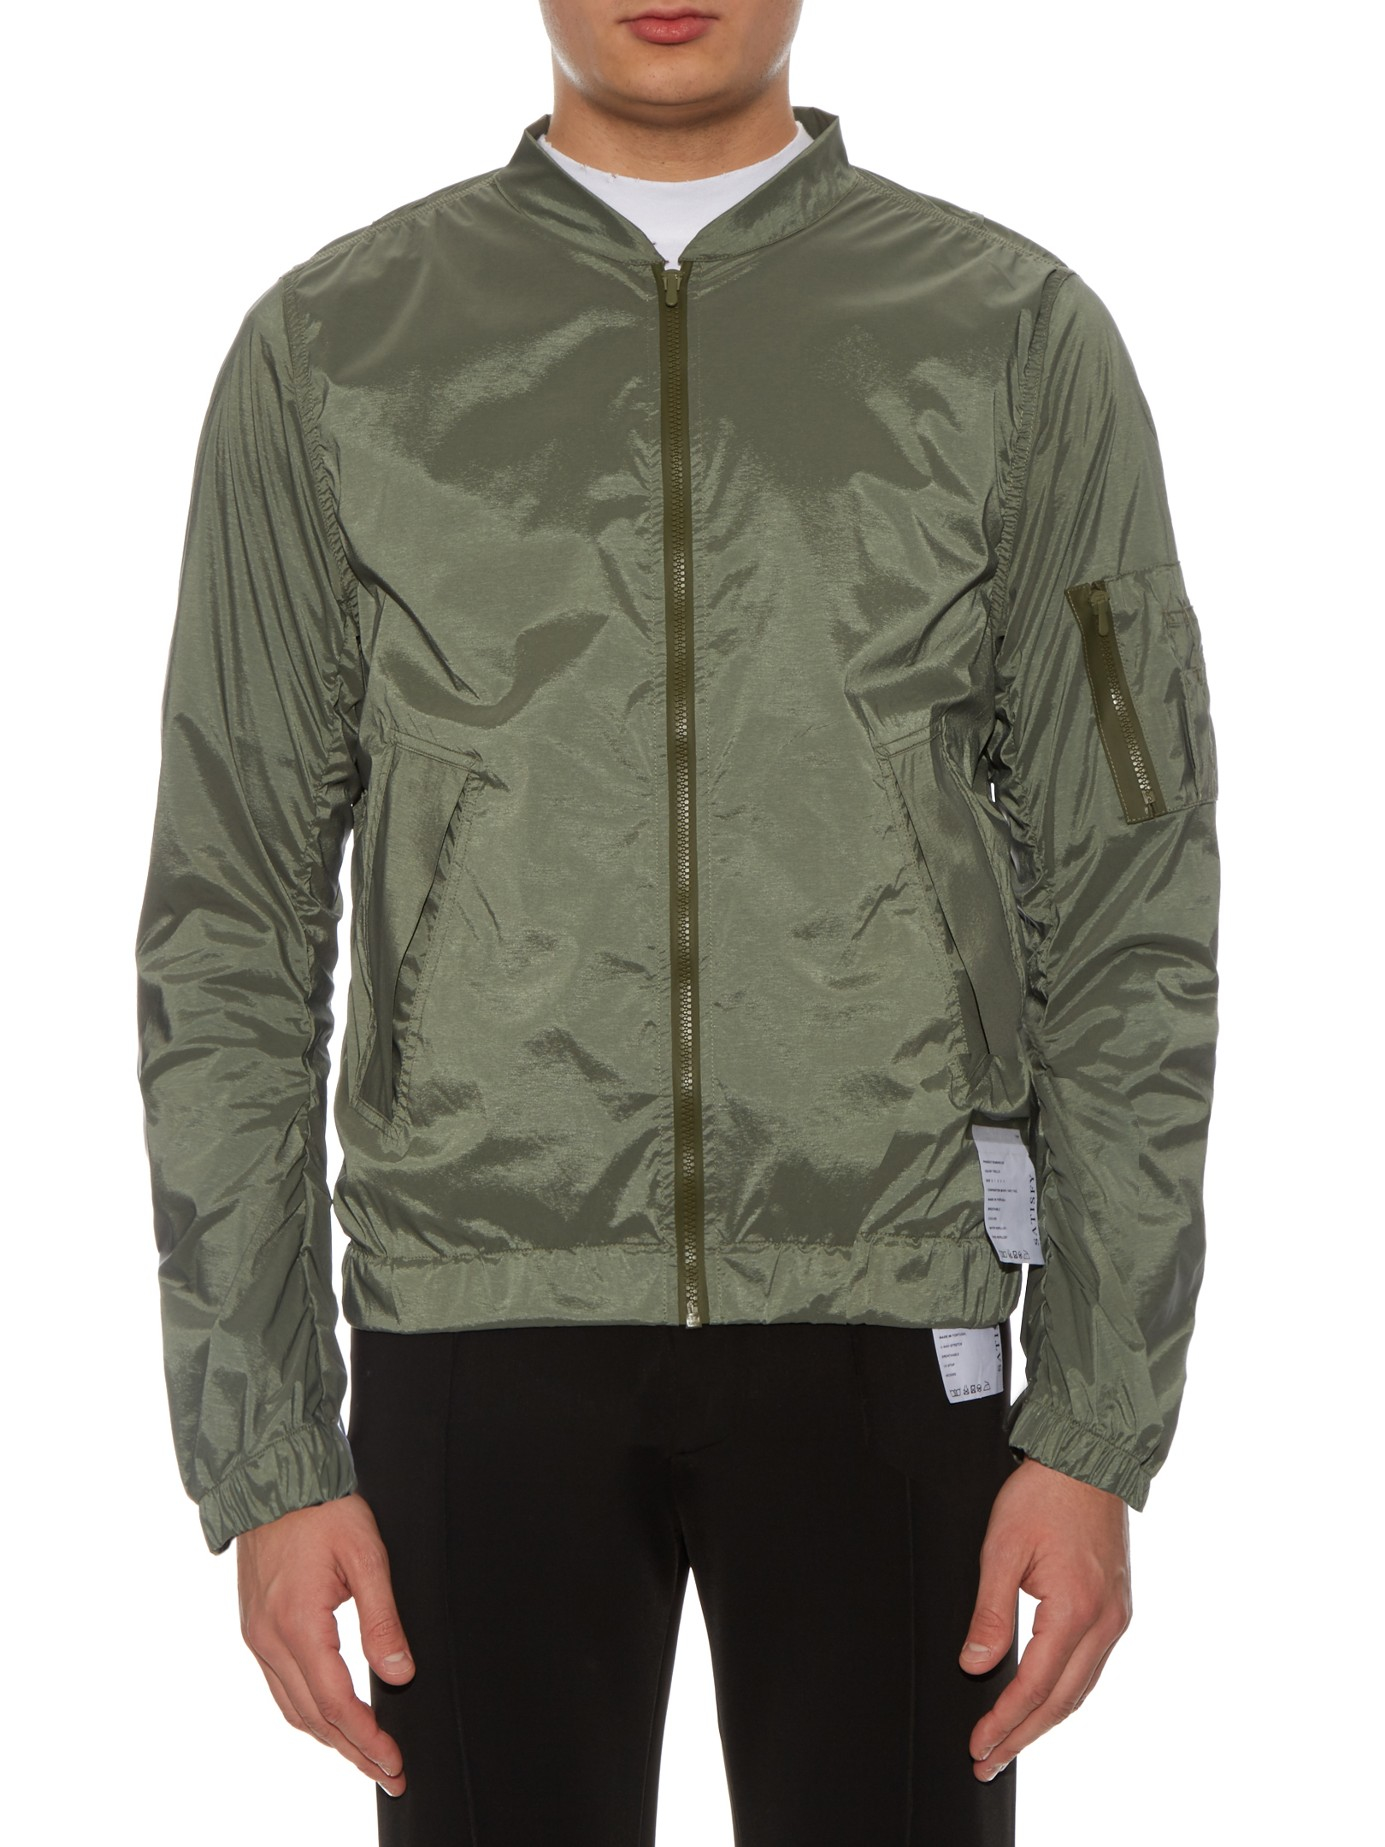 Lyst - Satisfy Bombardier Technical Jacket in Gray for Men